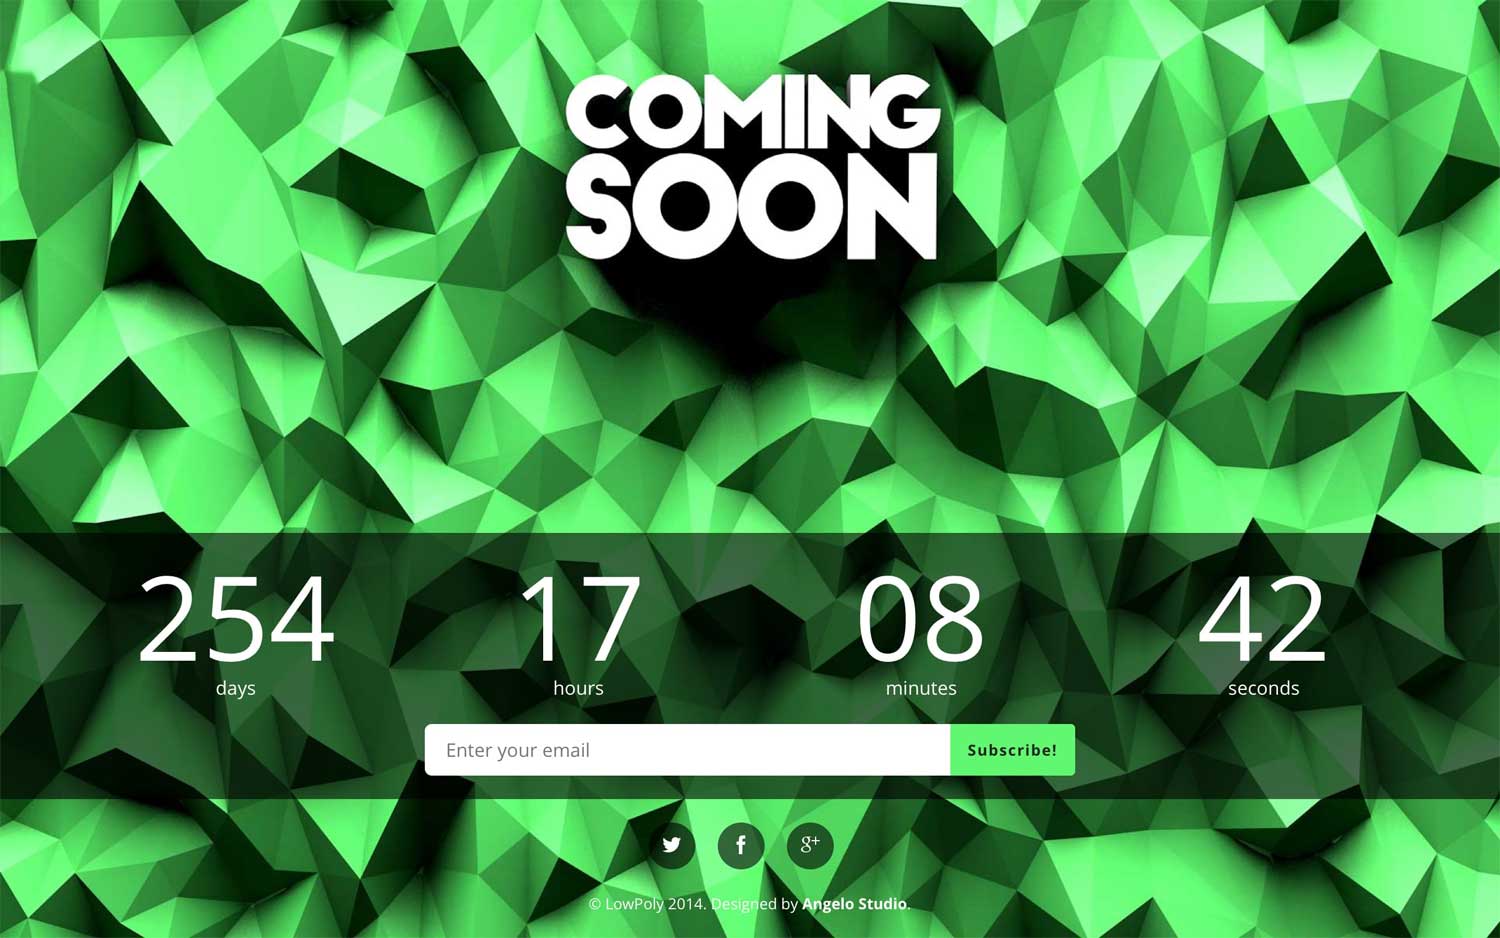 LowPoly One Page – Coming Soon Html Template